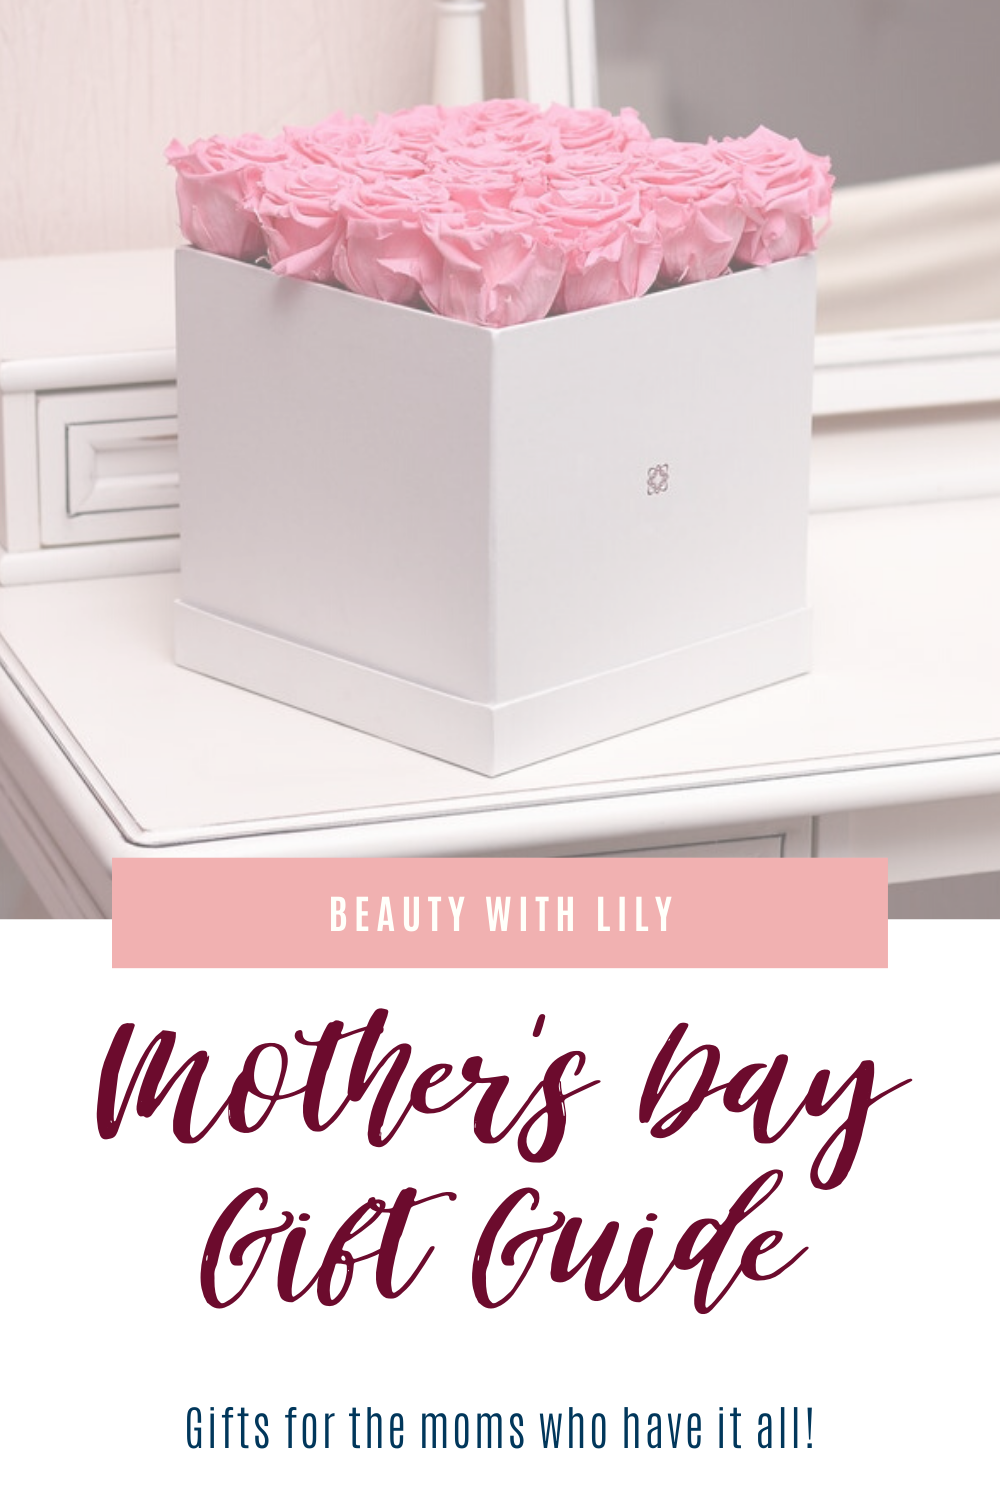 Mother's Day Gift Guide // Mother's Day Gift Ideas // Gift Ideas for Her // Affordable Gift Ideas for Women | Beauty With Lily #giftideas #mothersdaygifts